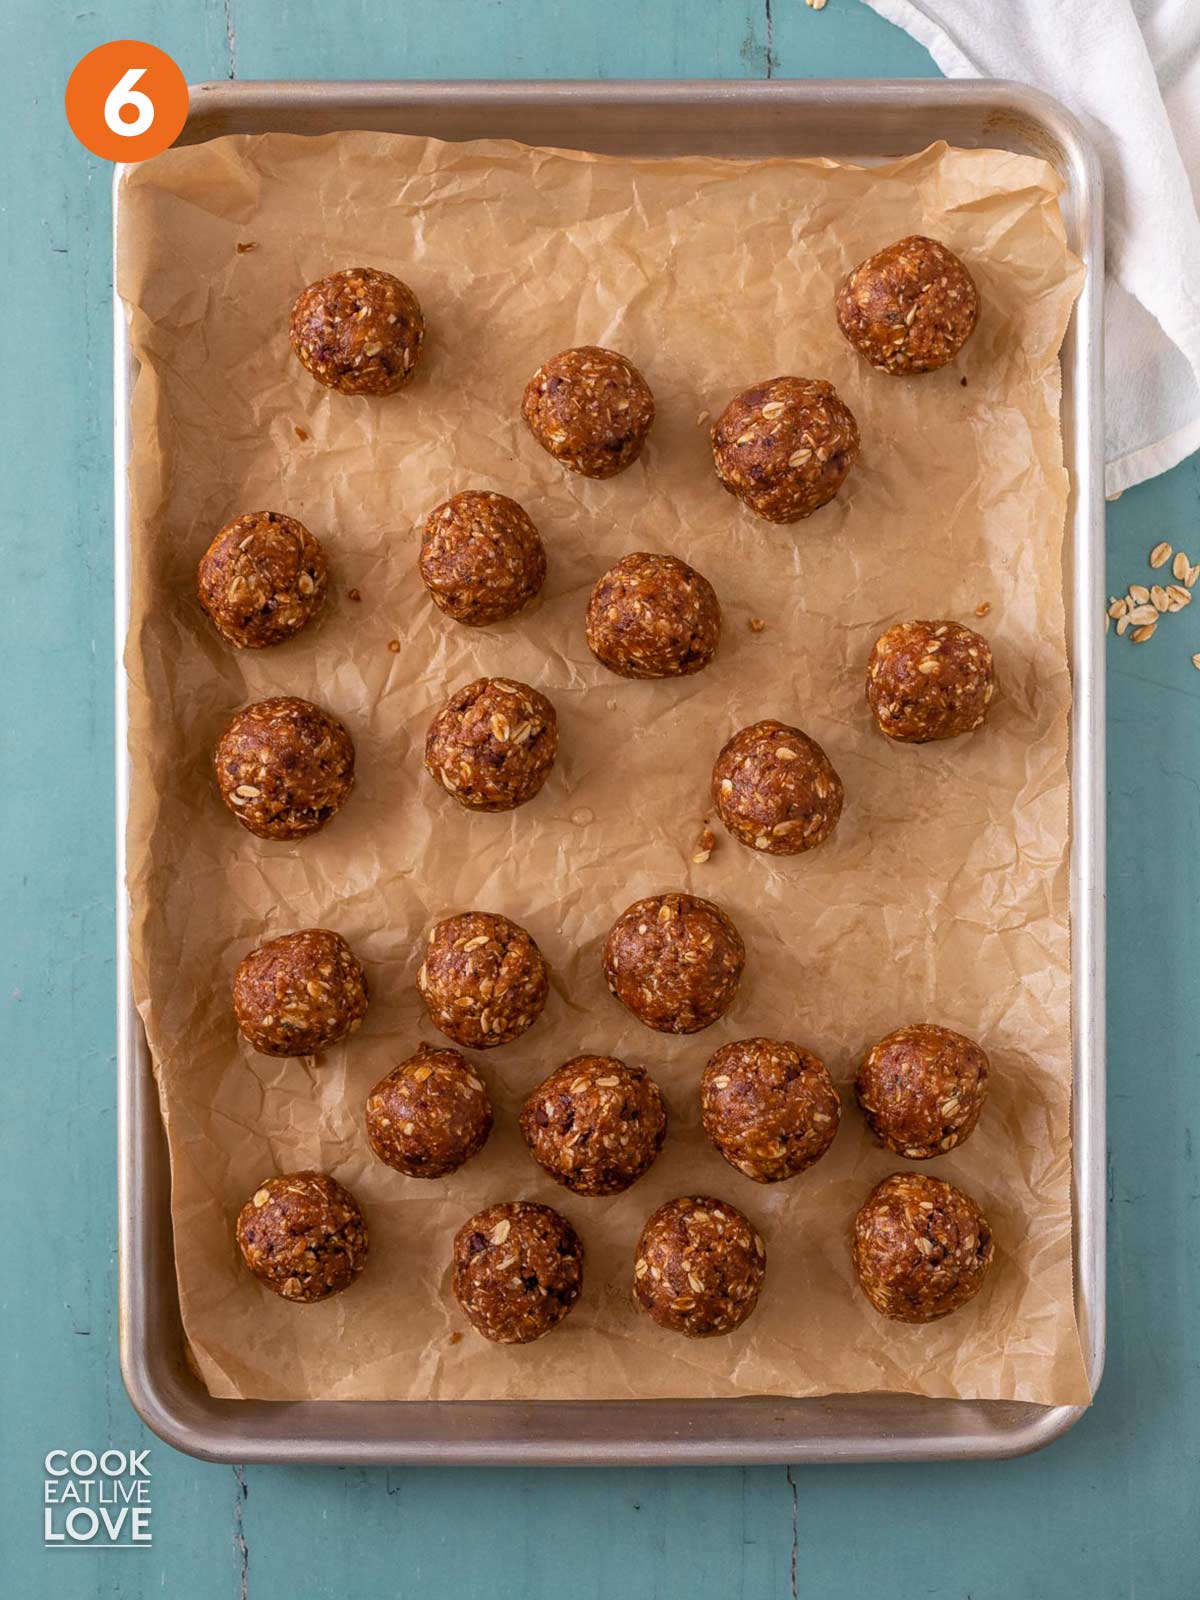 Healthy peanut butter balls laid out on a tray.